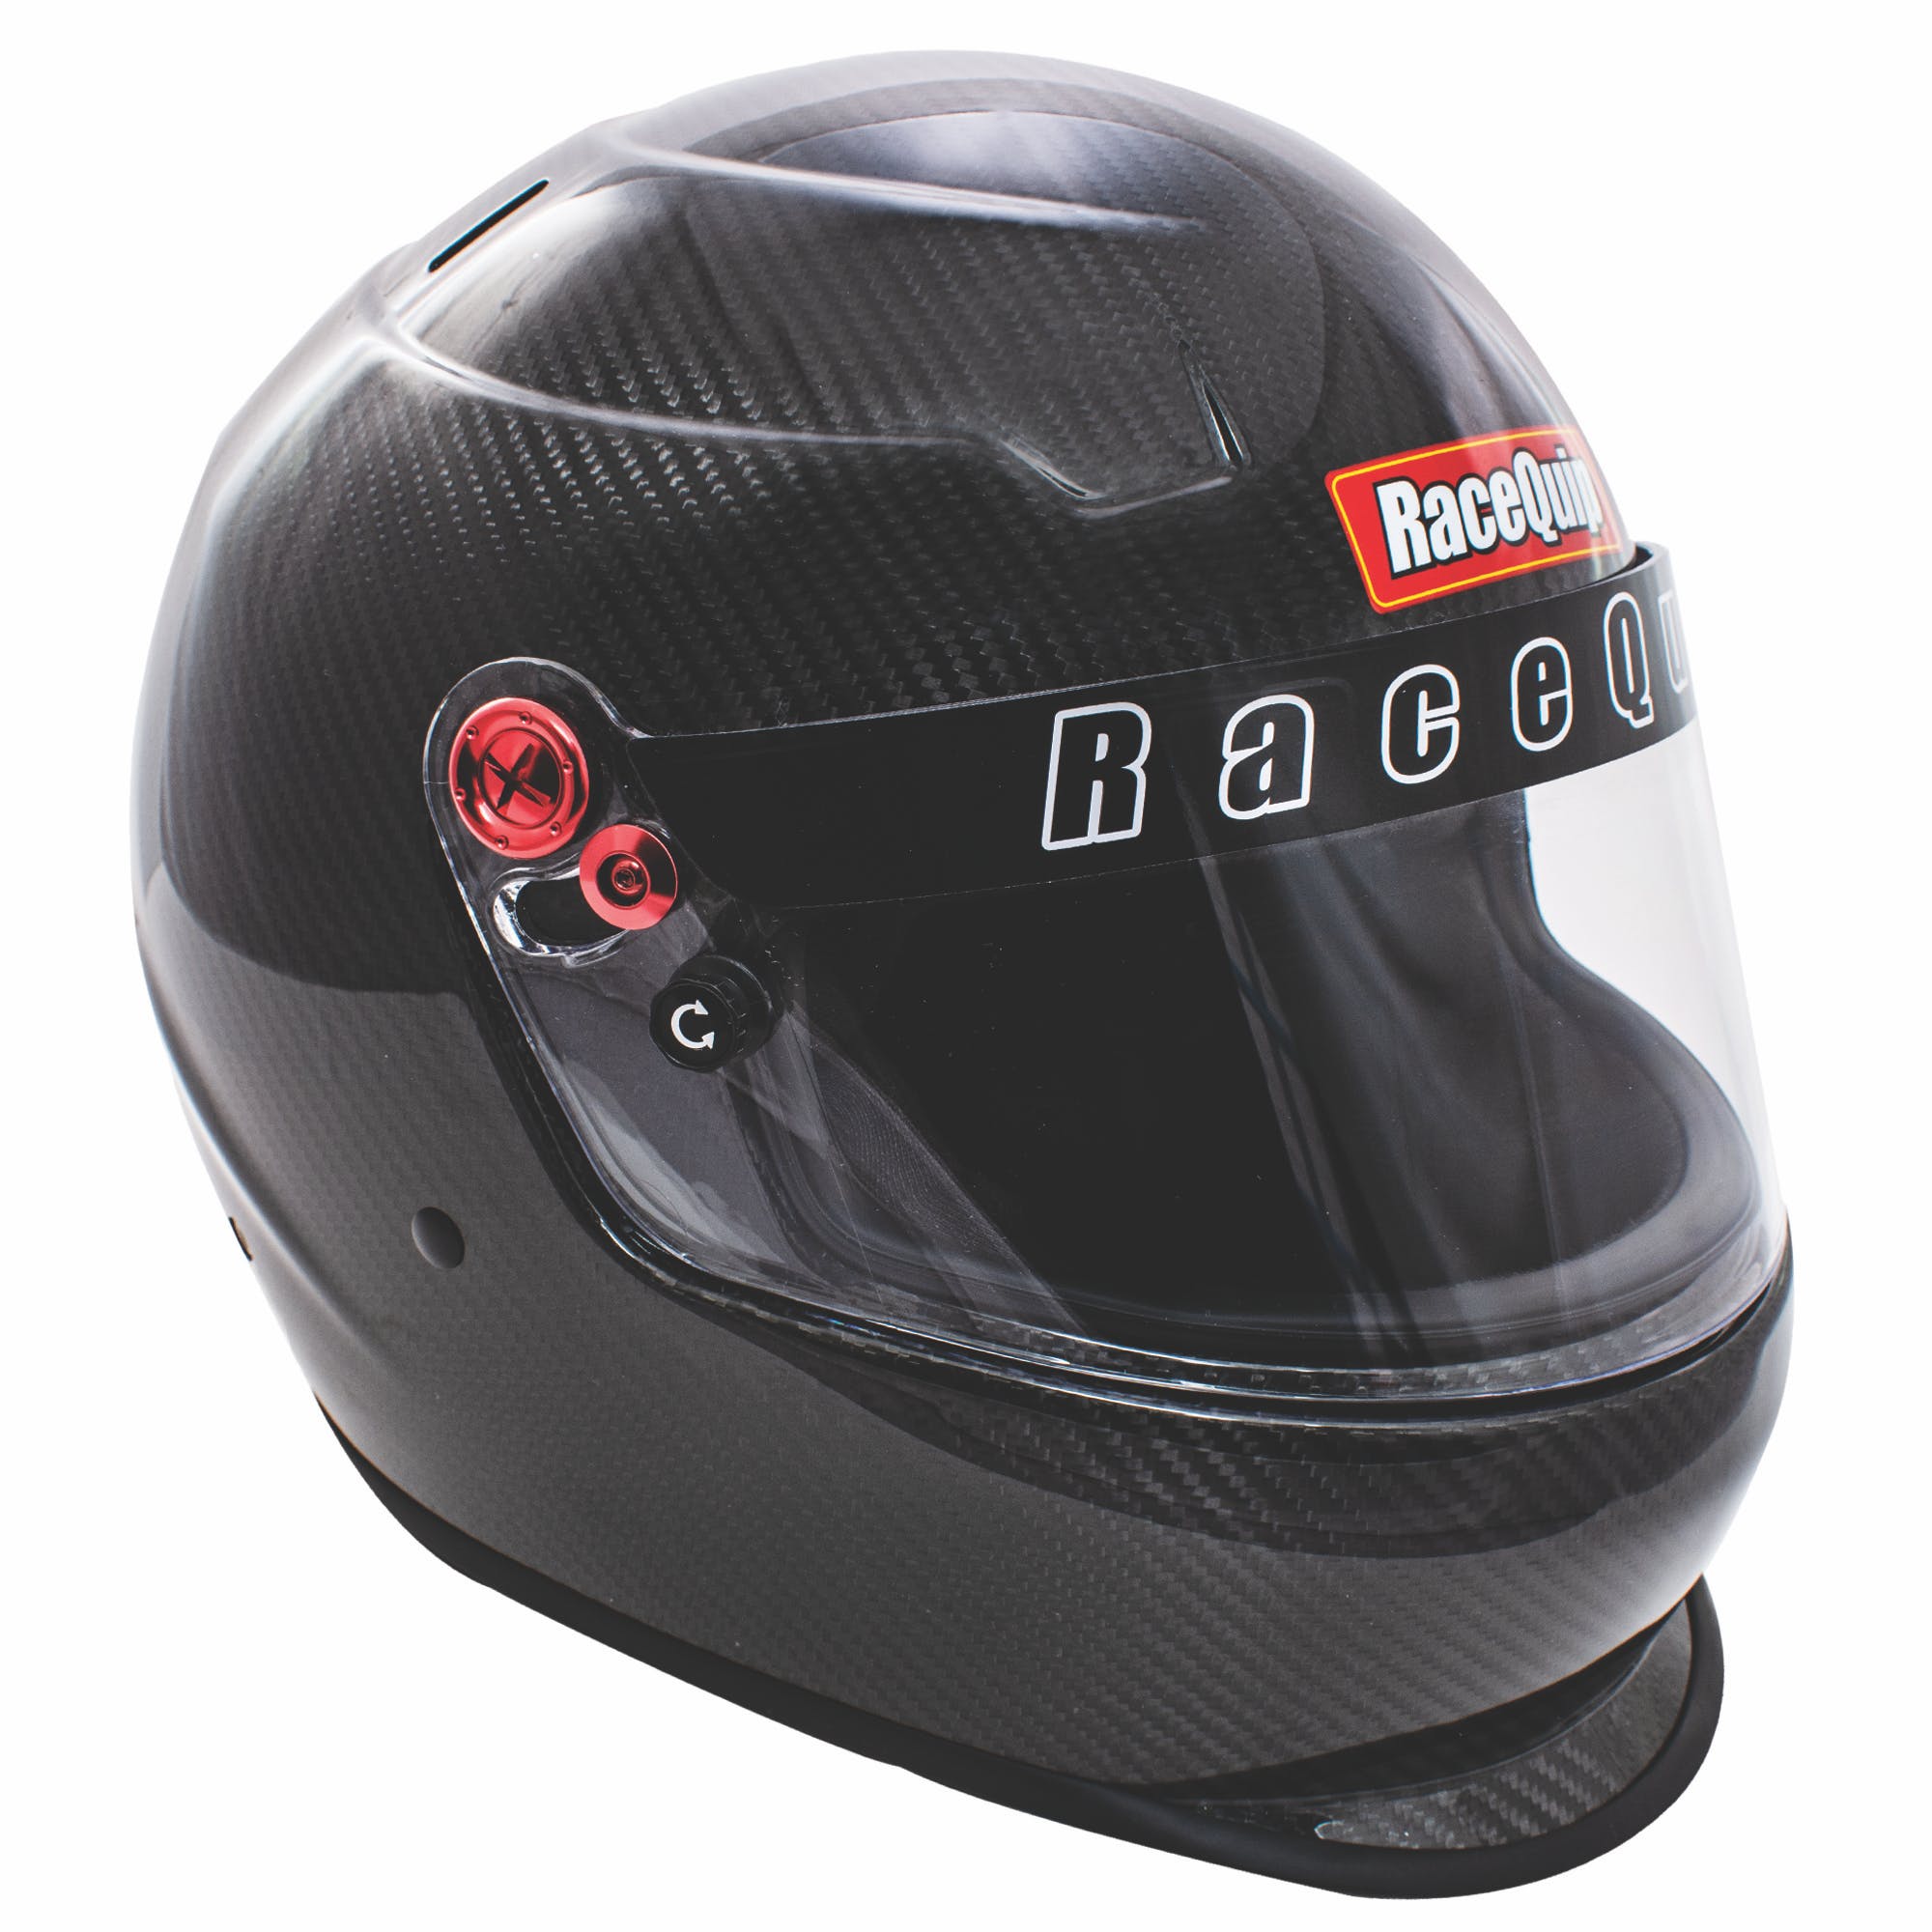 RaceQuip 92769029 PRO20 Helmet Snell SA2020  Rated; Carbon Fiber, Small